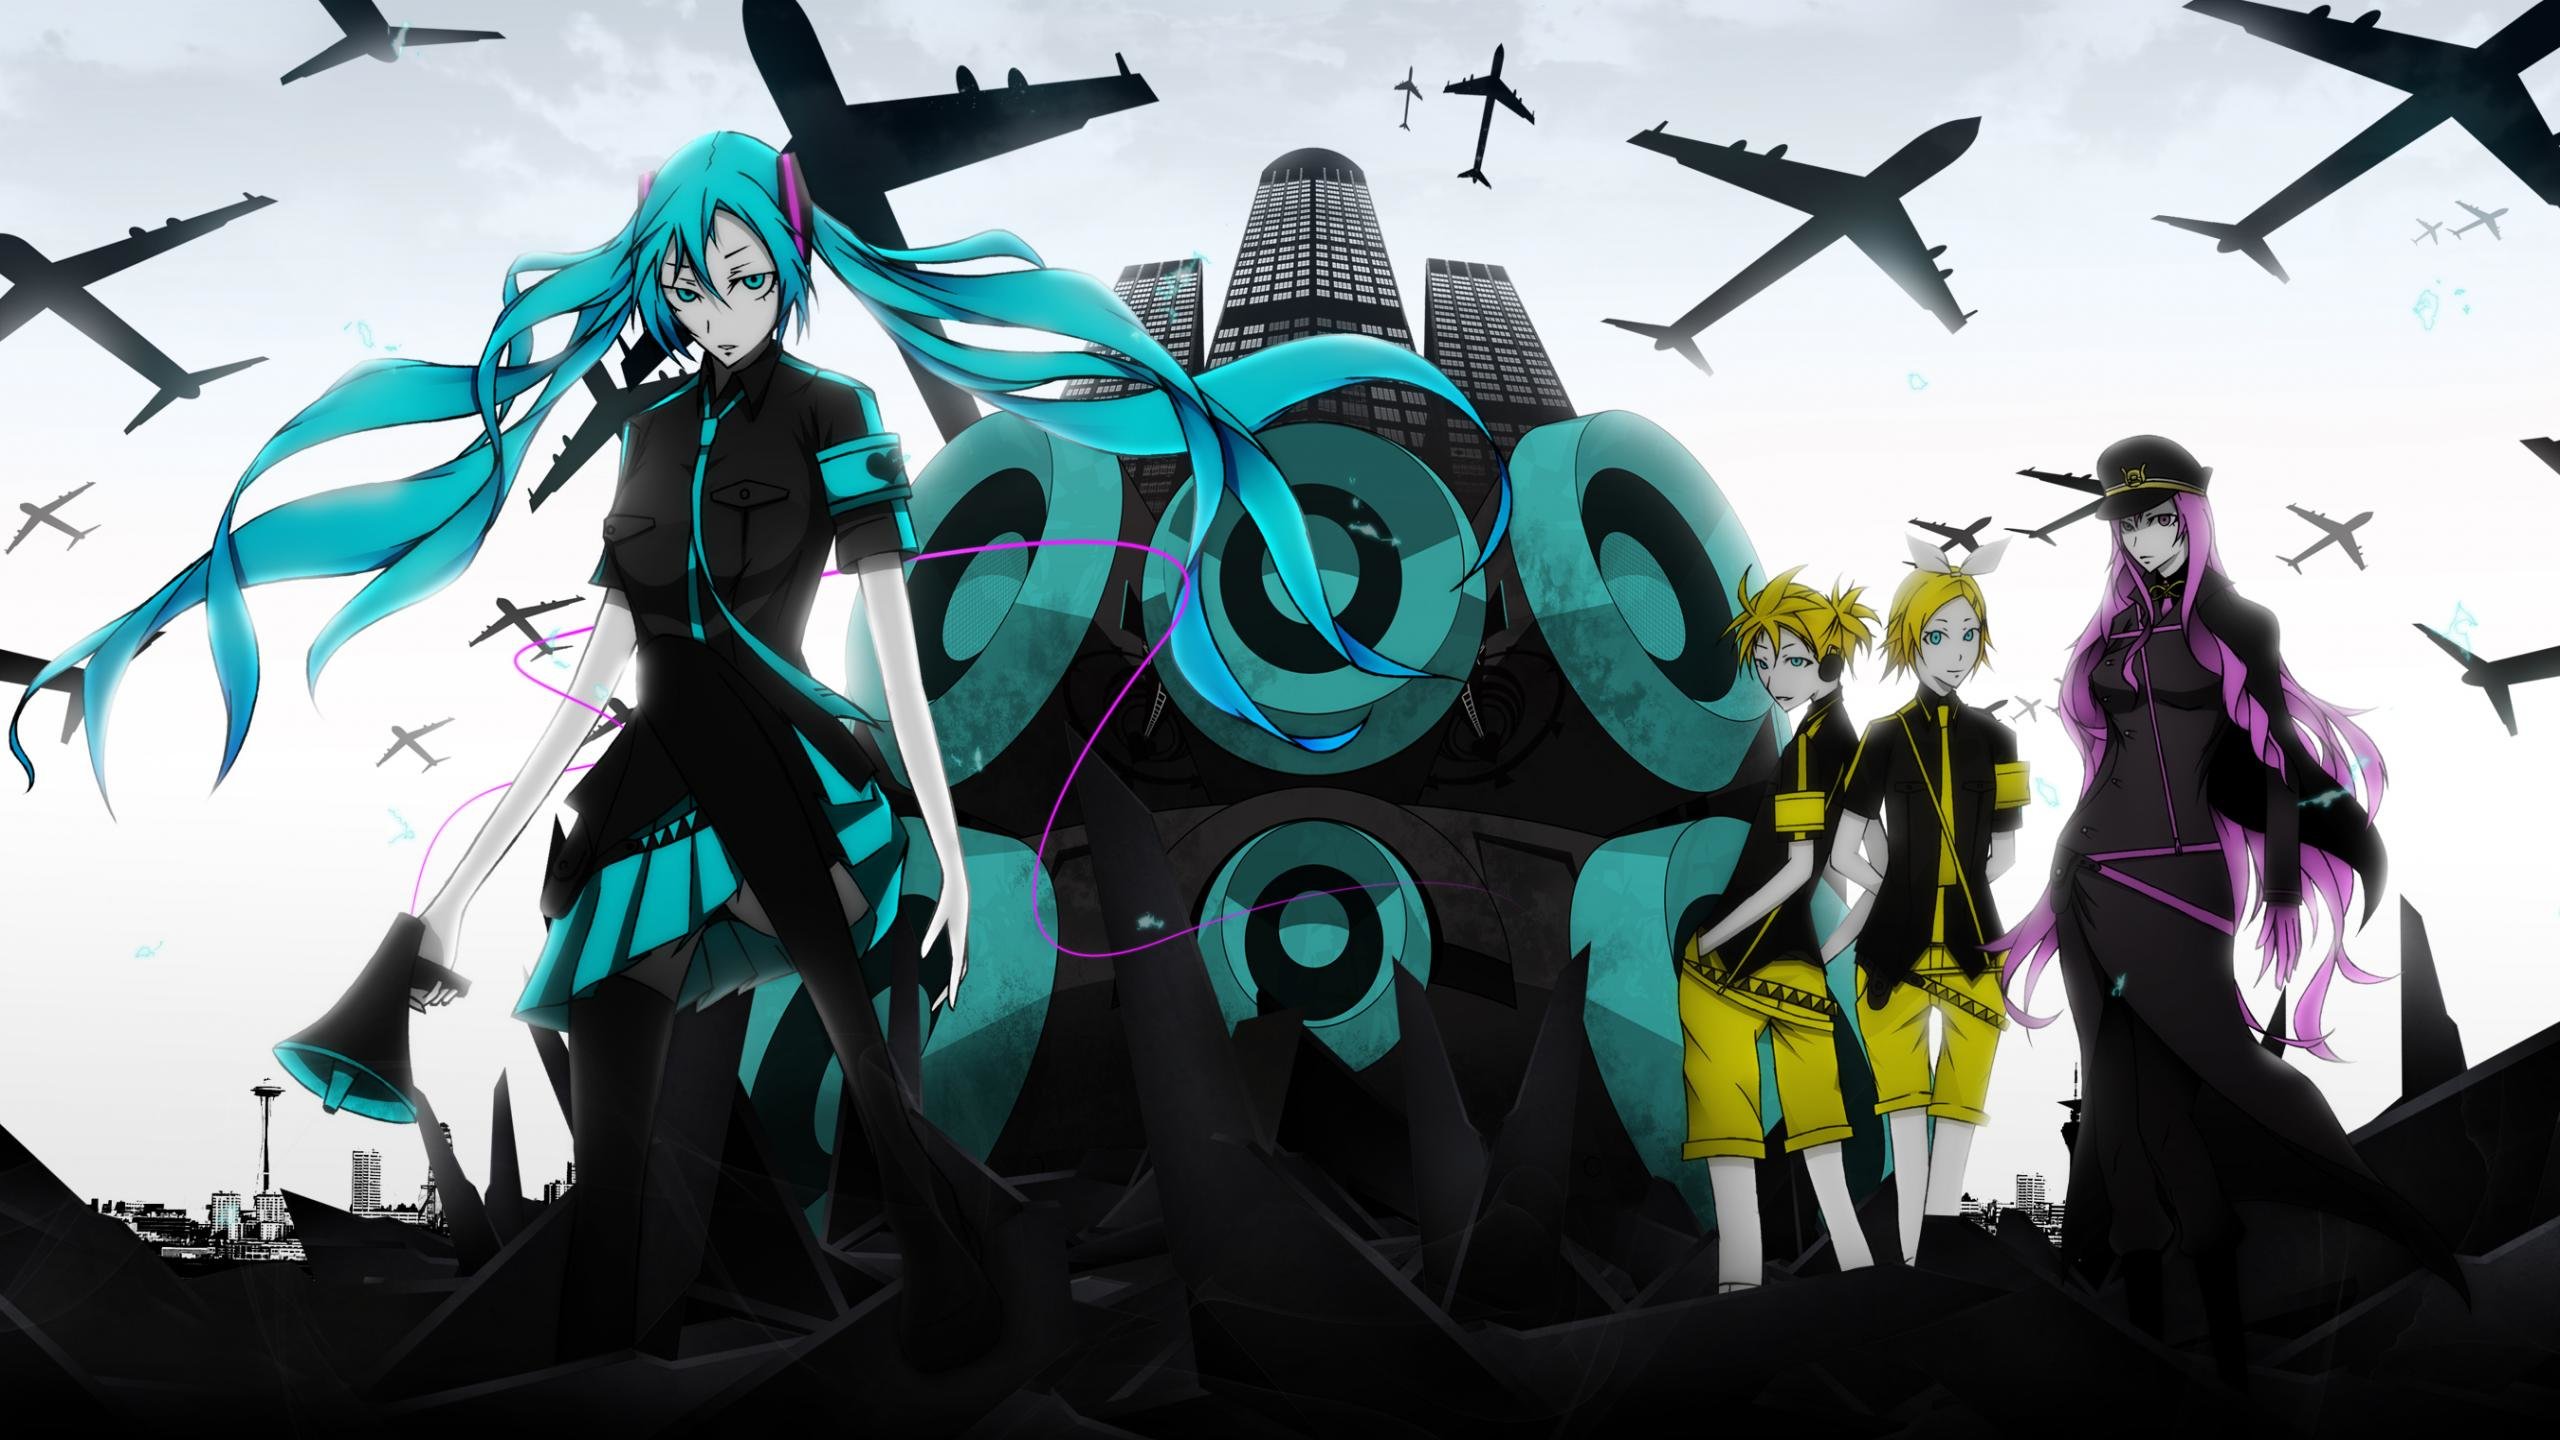 Download hd 2560x1440 Vocaloid computer wallpaper ID:2635 for free